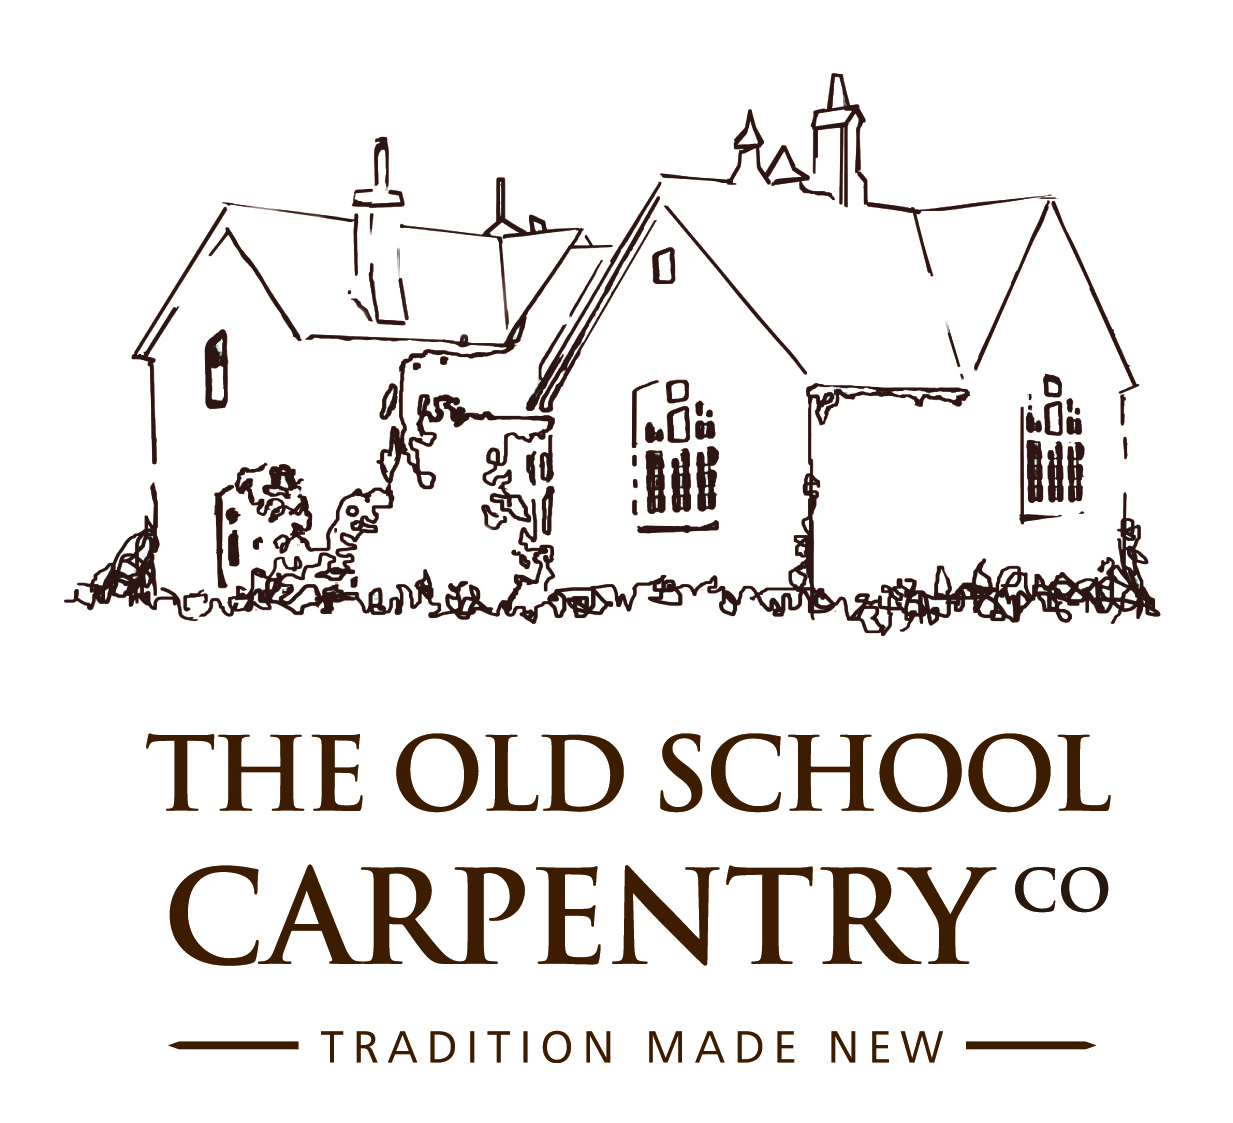 The Old School Carpentry Company